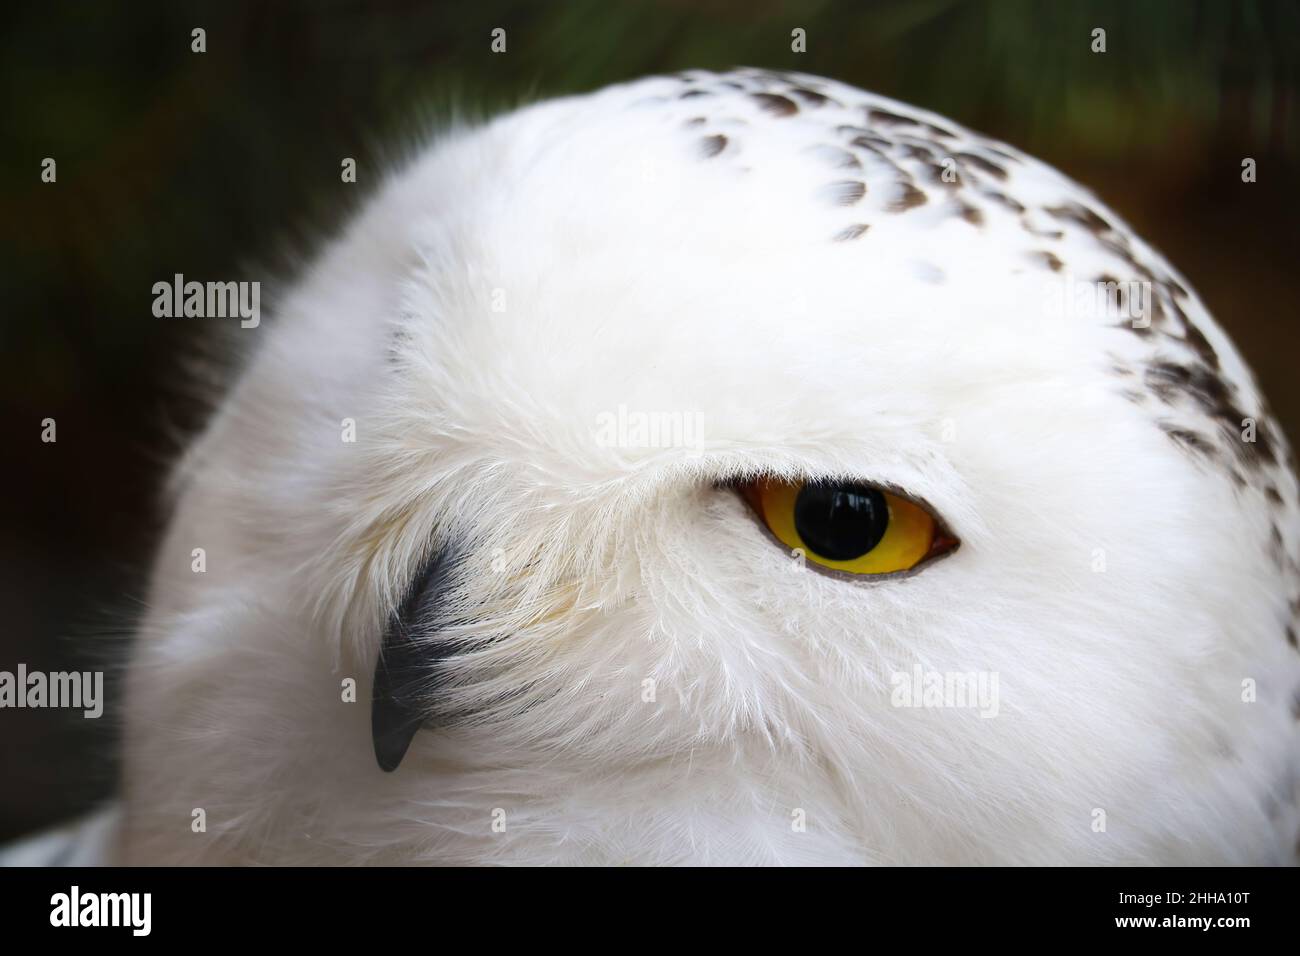 The head of a white snowy owl Stock Photo